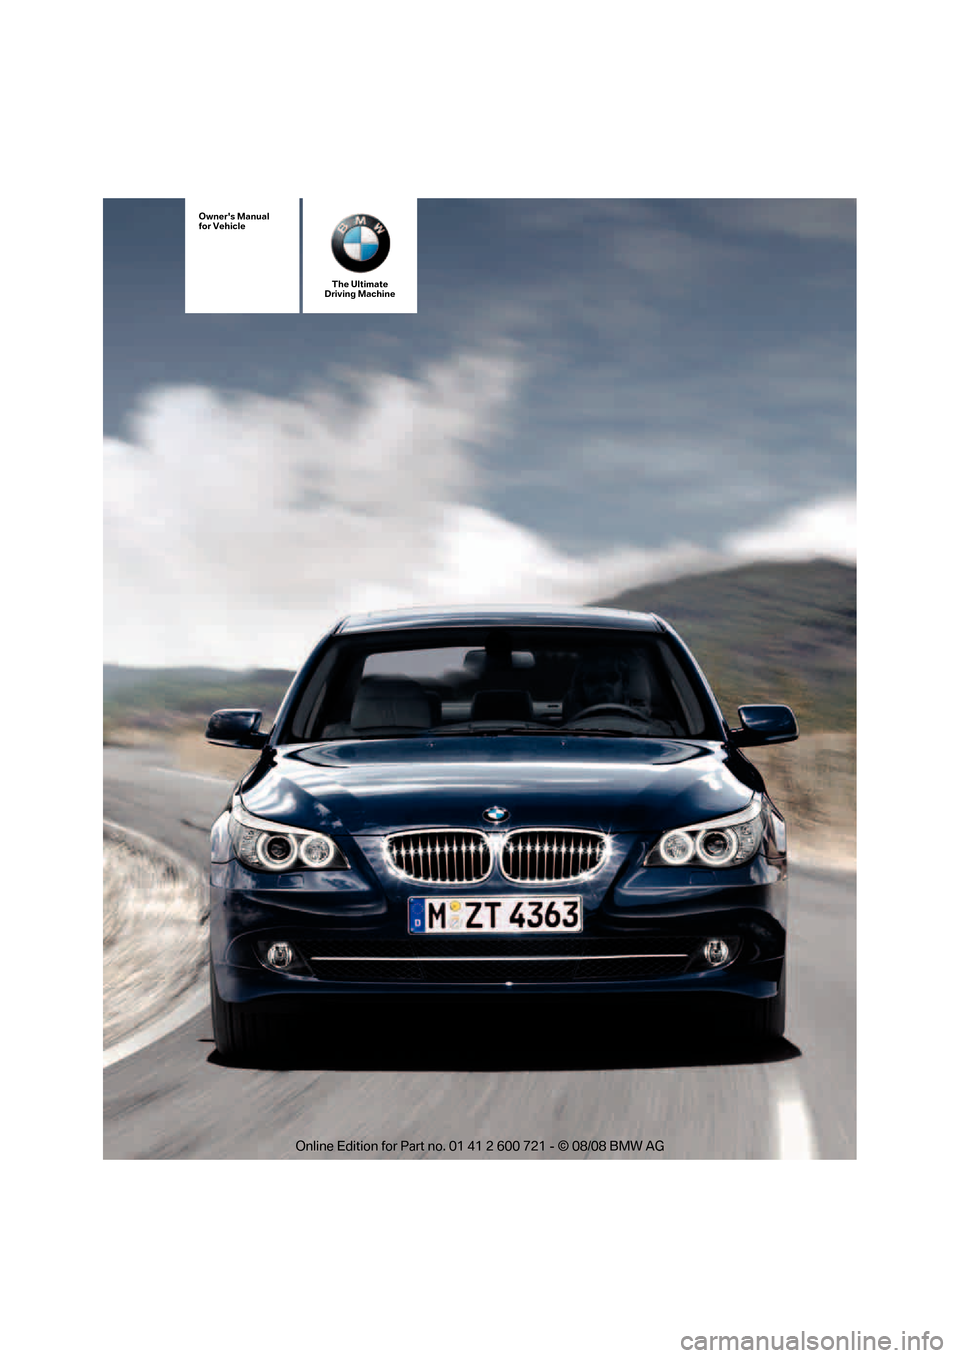 BMW 535I SEDAN 2009 E60 Owners Manual The Ultimate
Driving Machine
Owners Manual
for Vehicle 